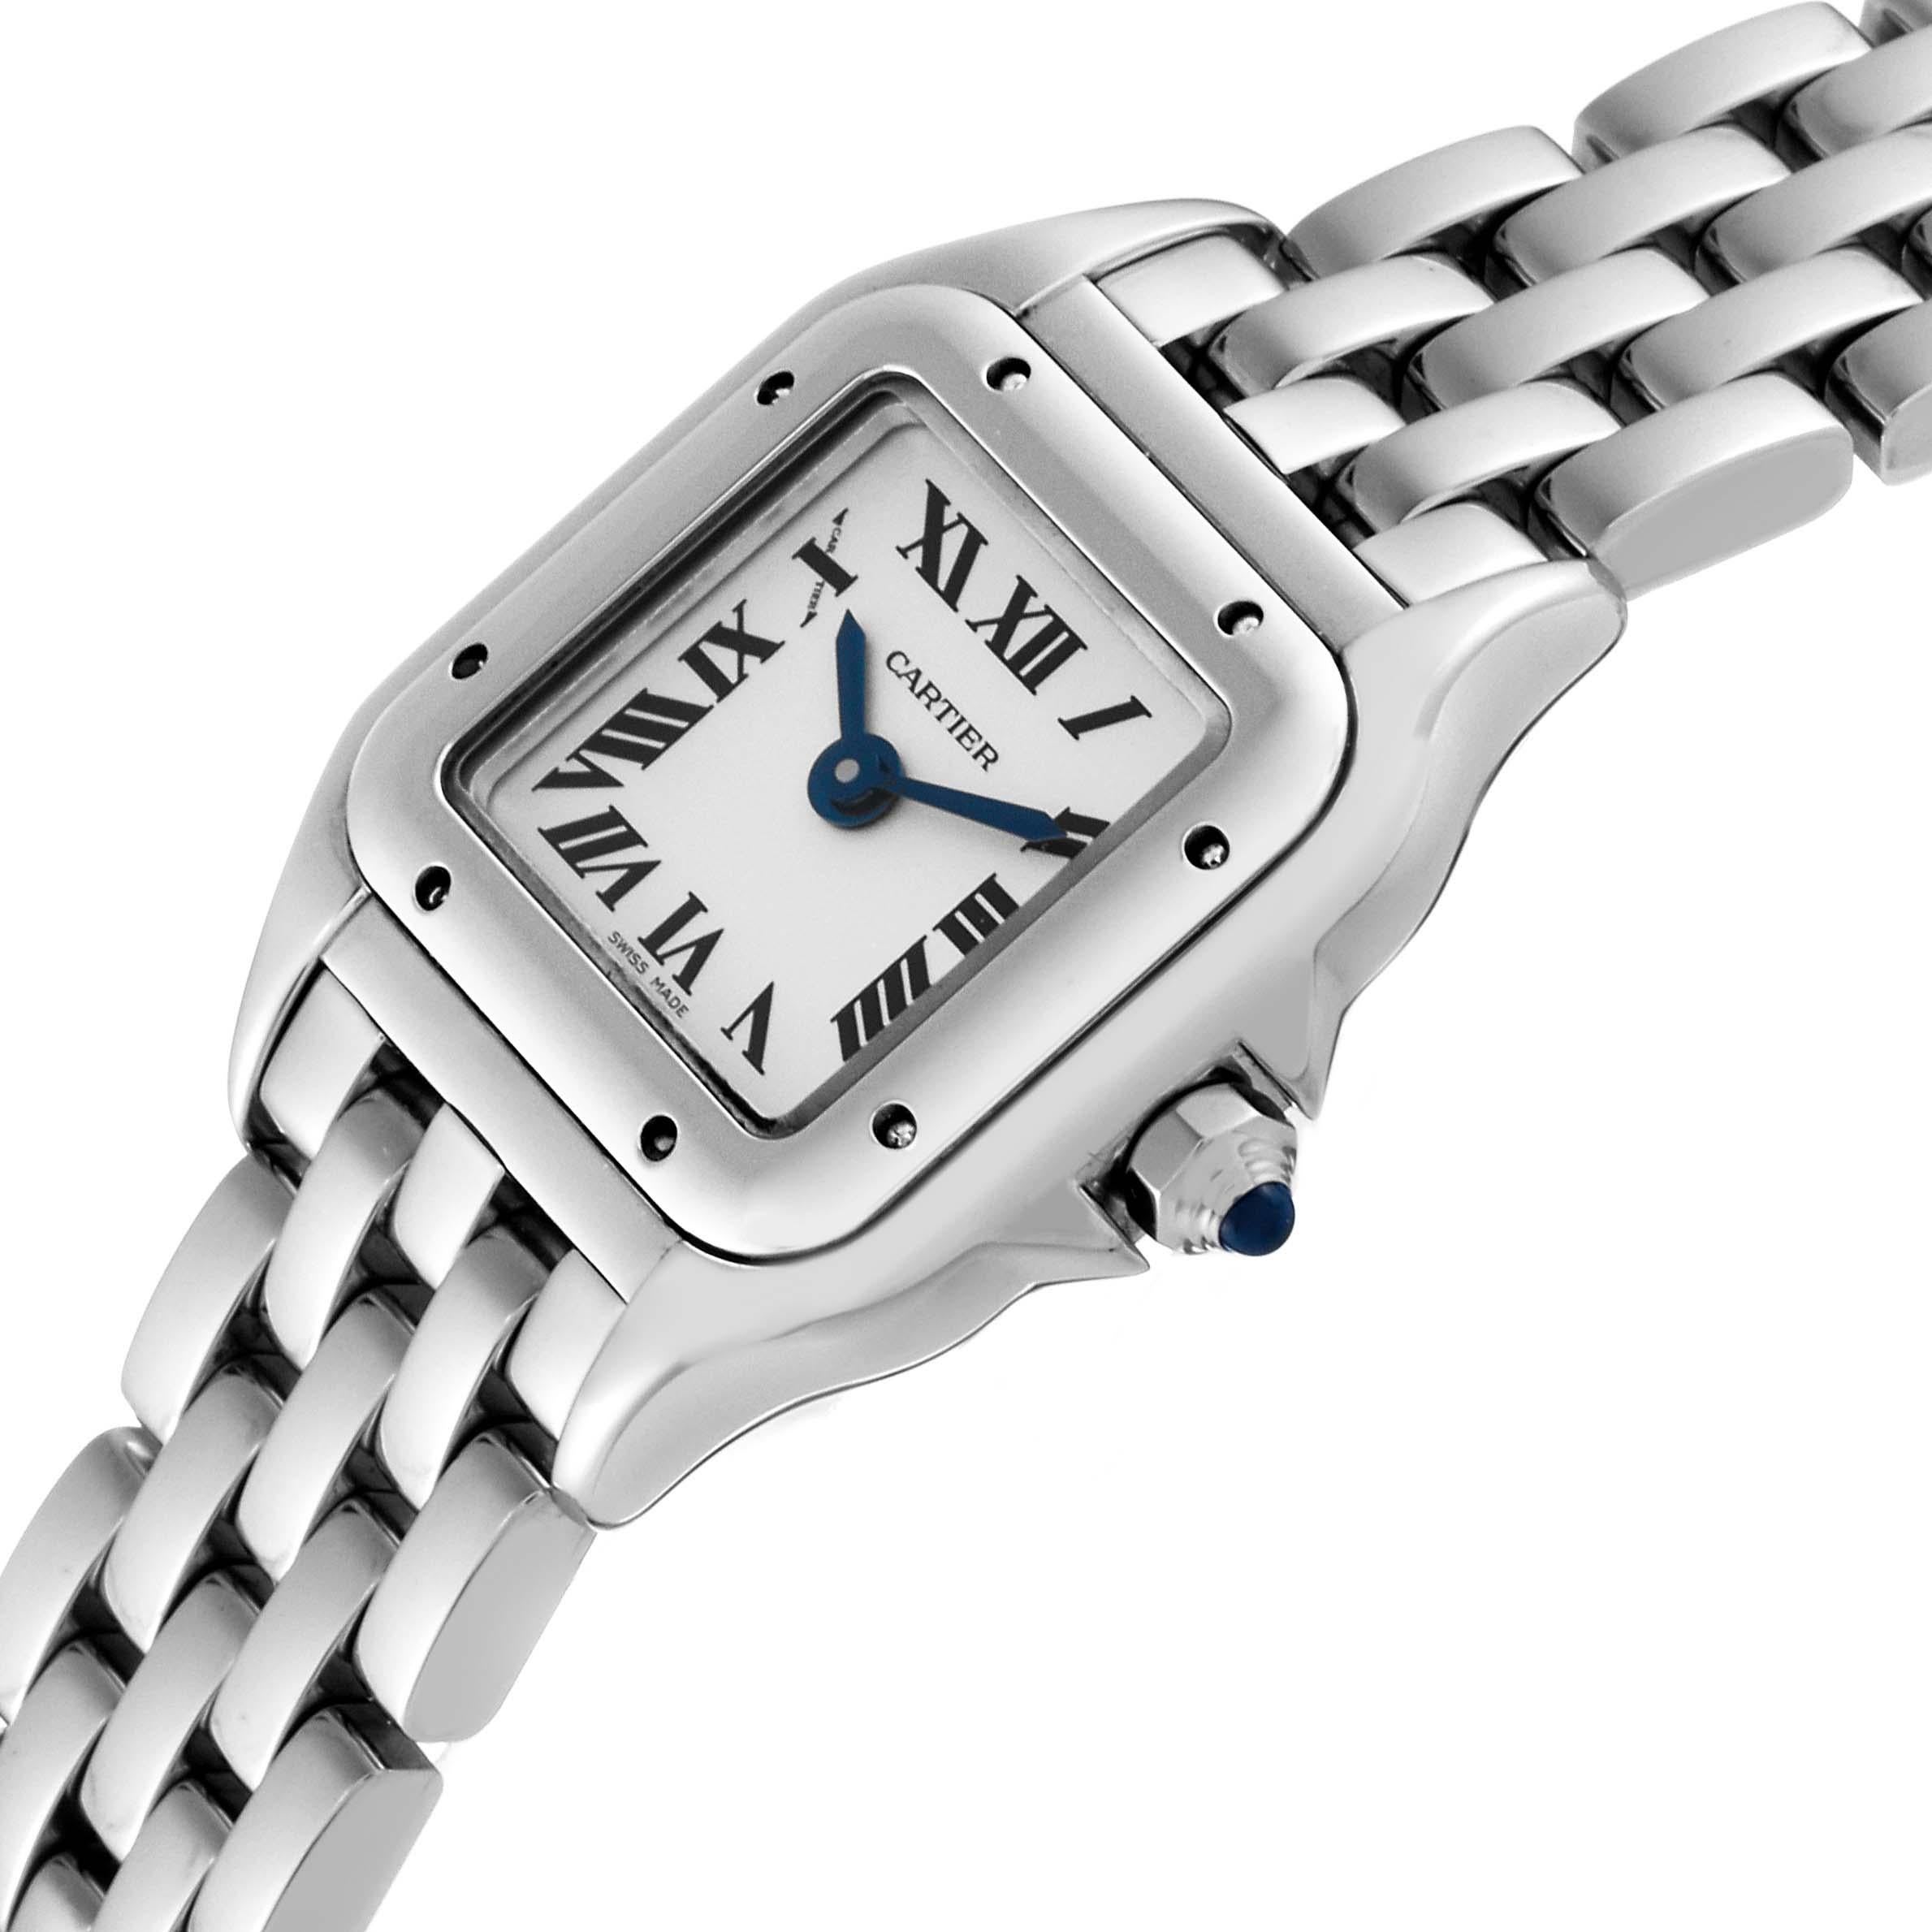 Cartier Panthere Mini Stainless Steel Ladies Watch WSPN0019 Unworn For Sale 1